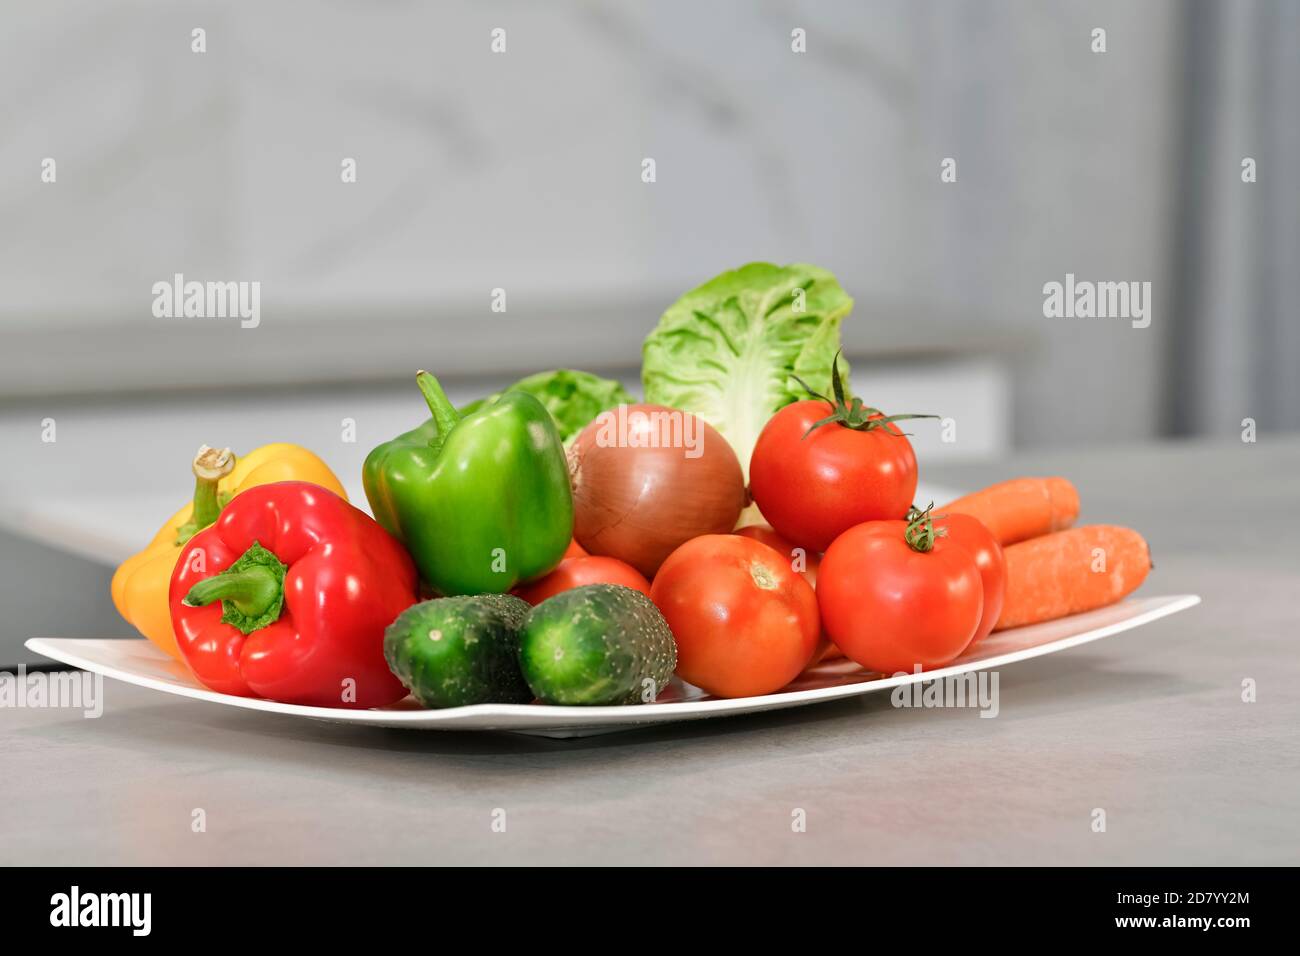 Close up of an assortment of fresh vegetables on a plate on an out of focus background. Fresh food and vegetables concept. Stock Photo